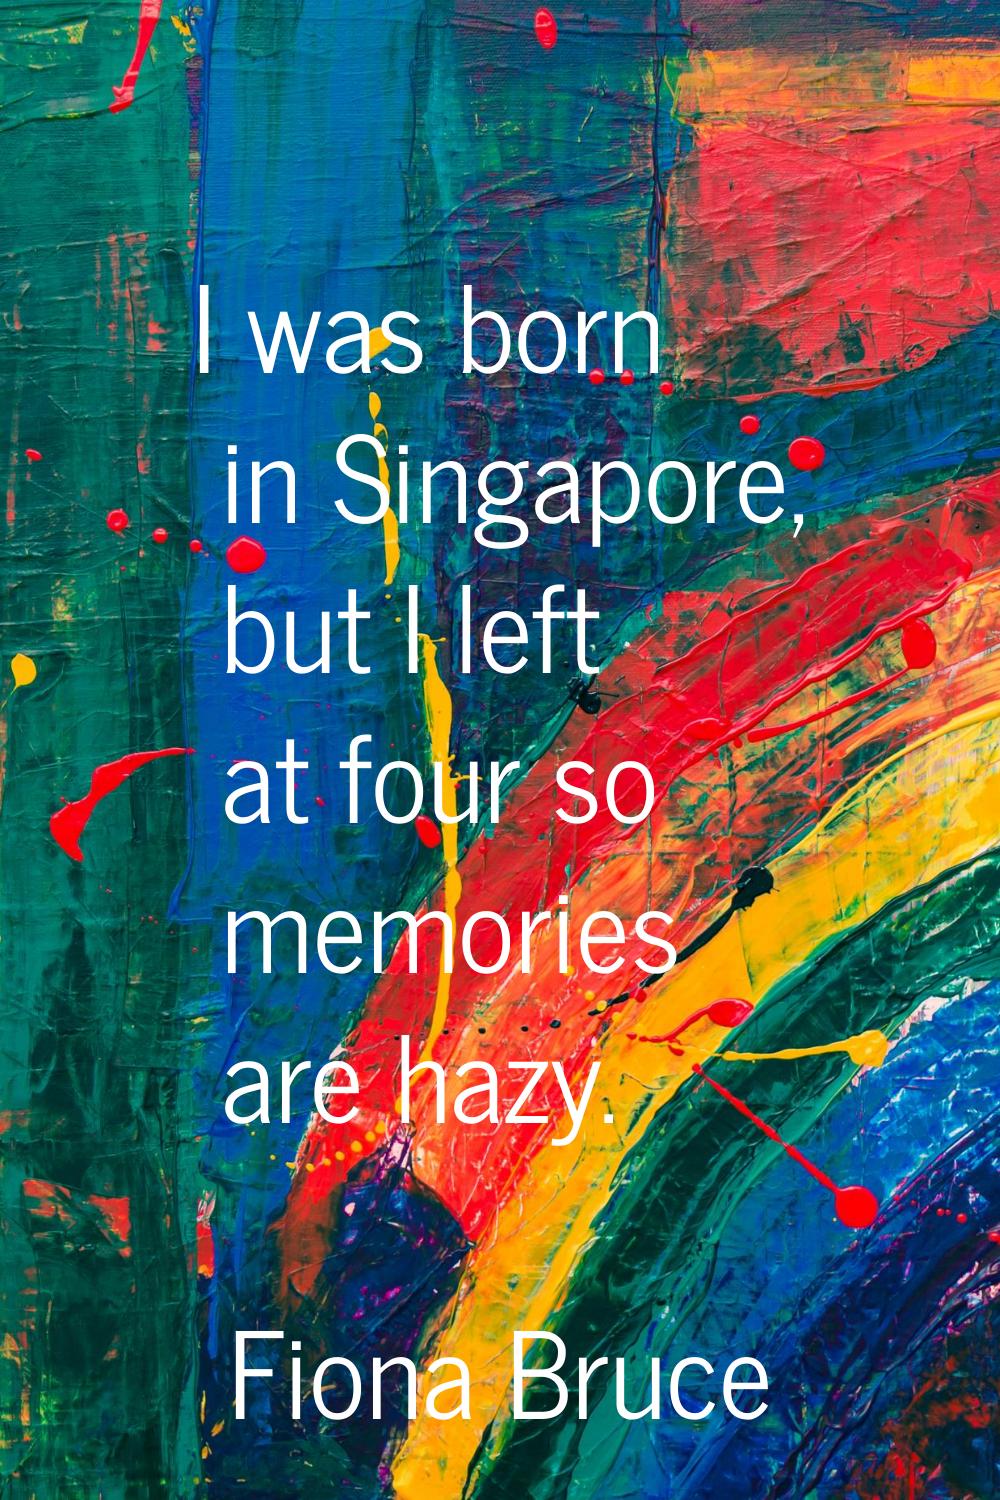 I was born in Singapore, but I left at four so memories are hazy.